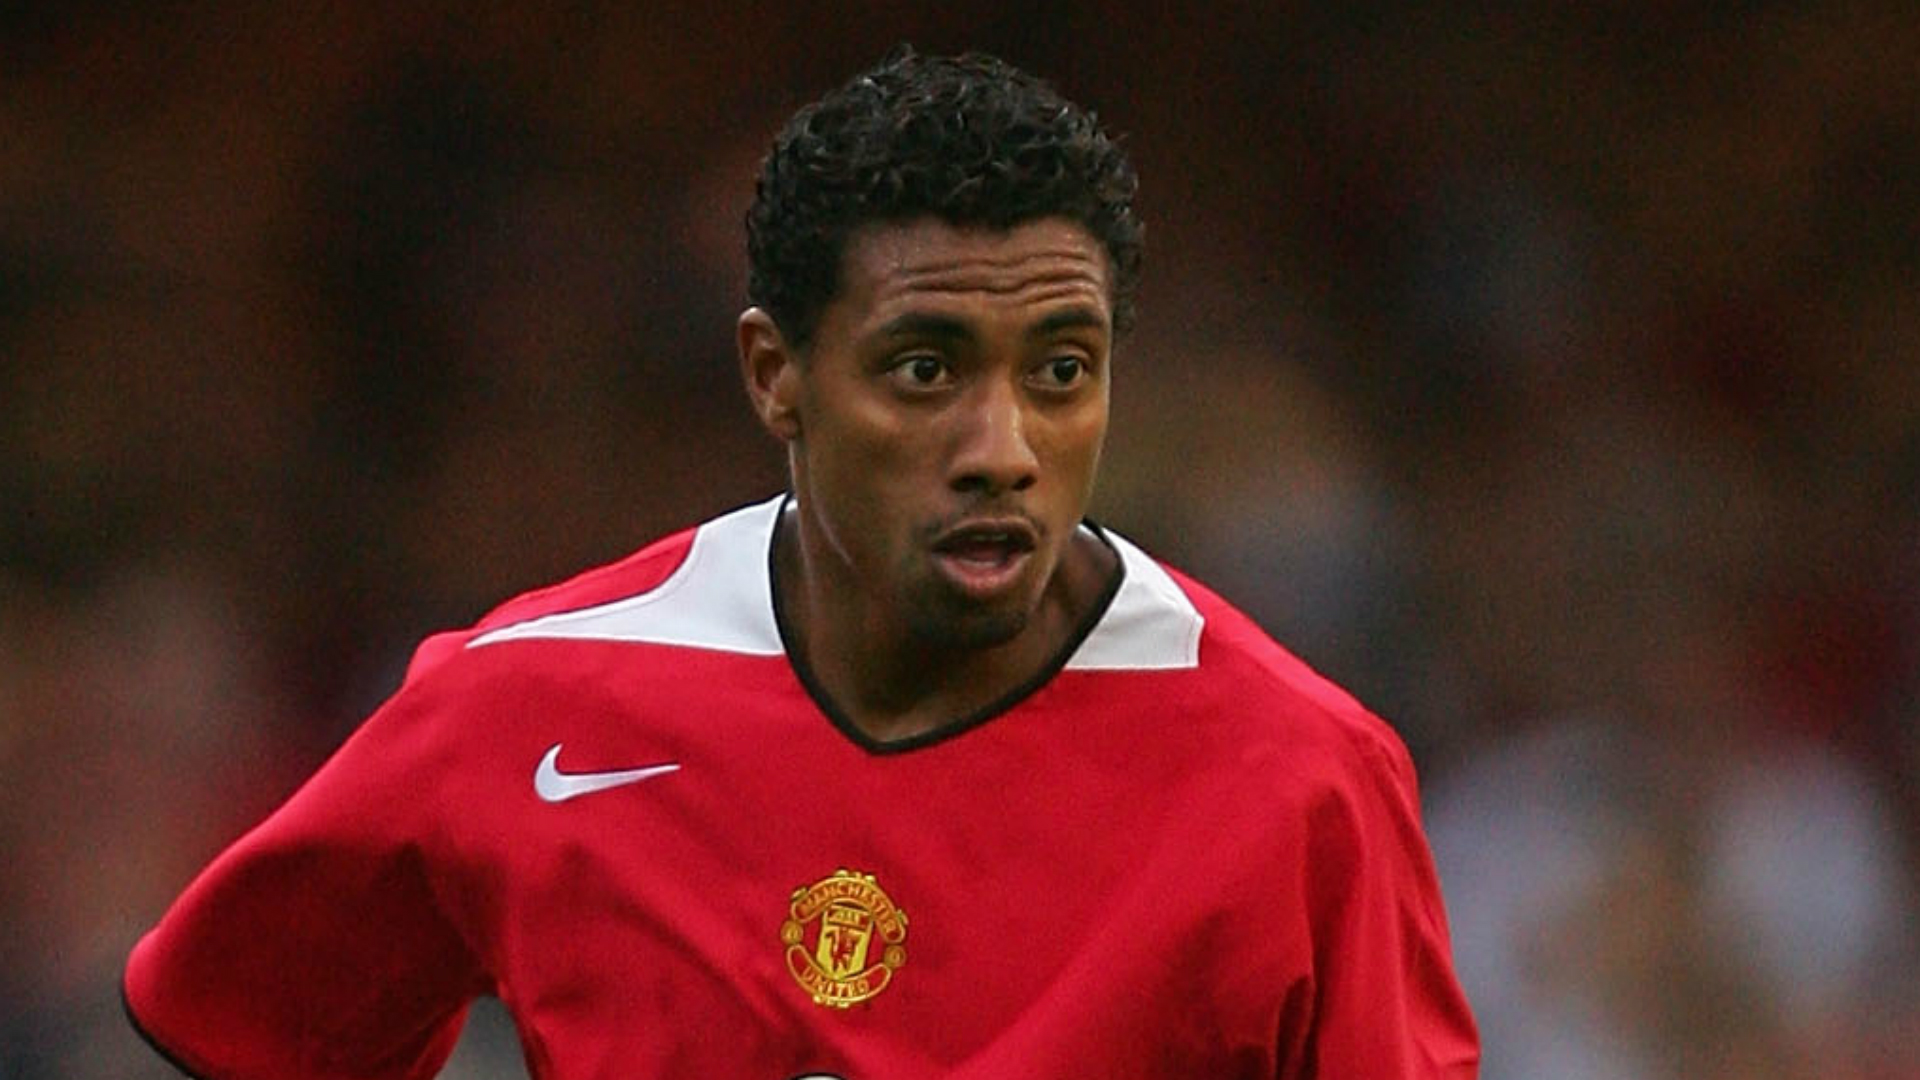 I only joined Man Utd because Ronaldinho told me he was going to Old Trafford! â€“ Kleberson